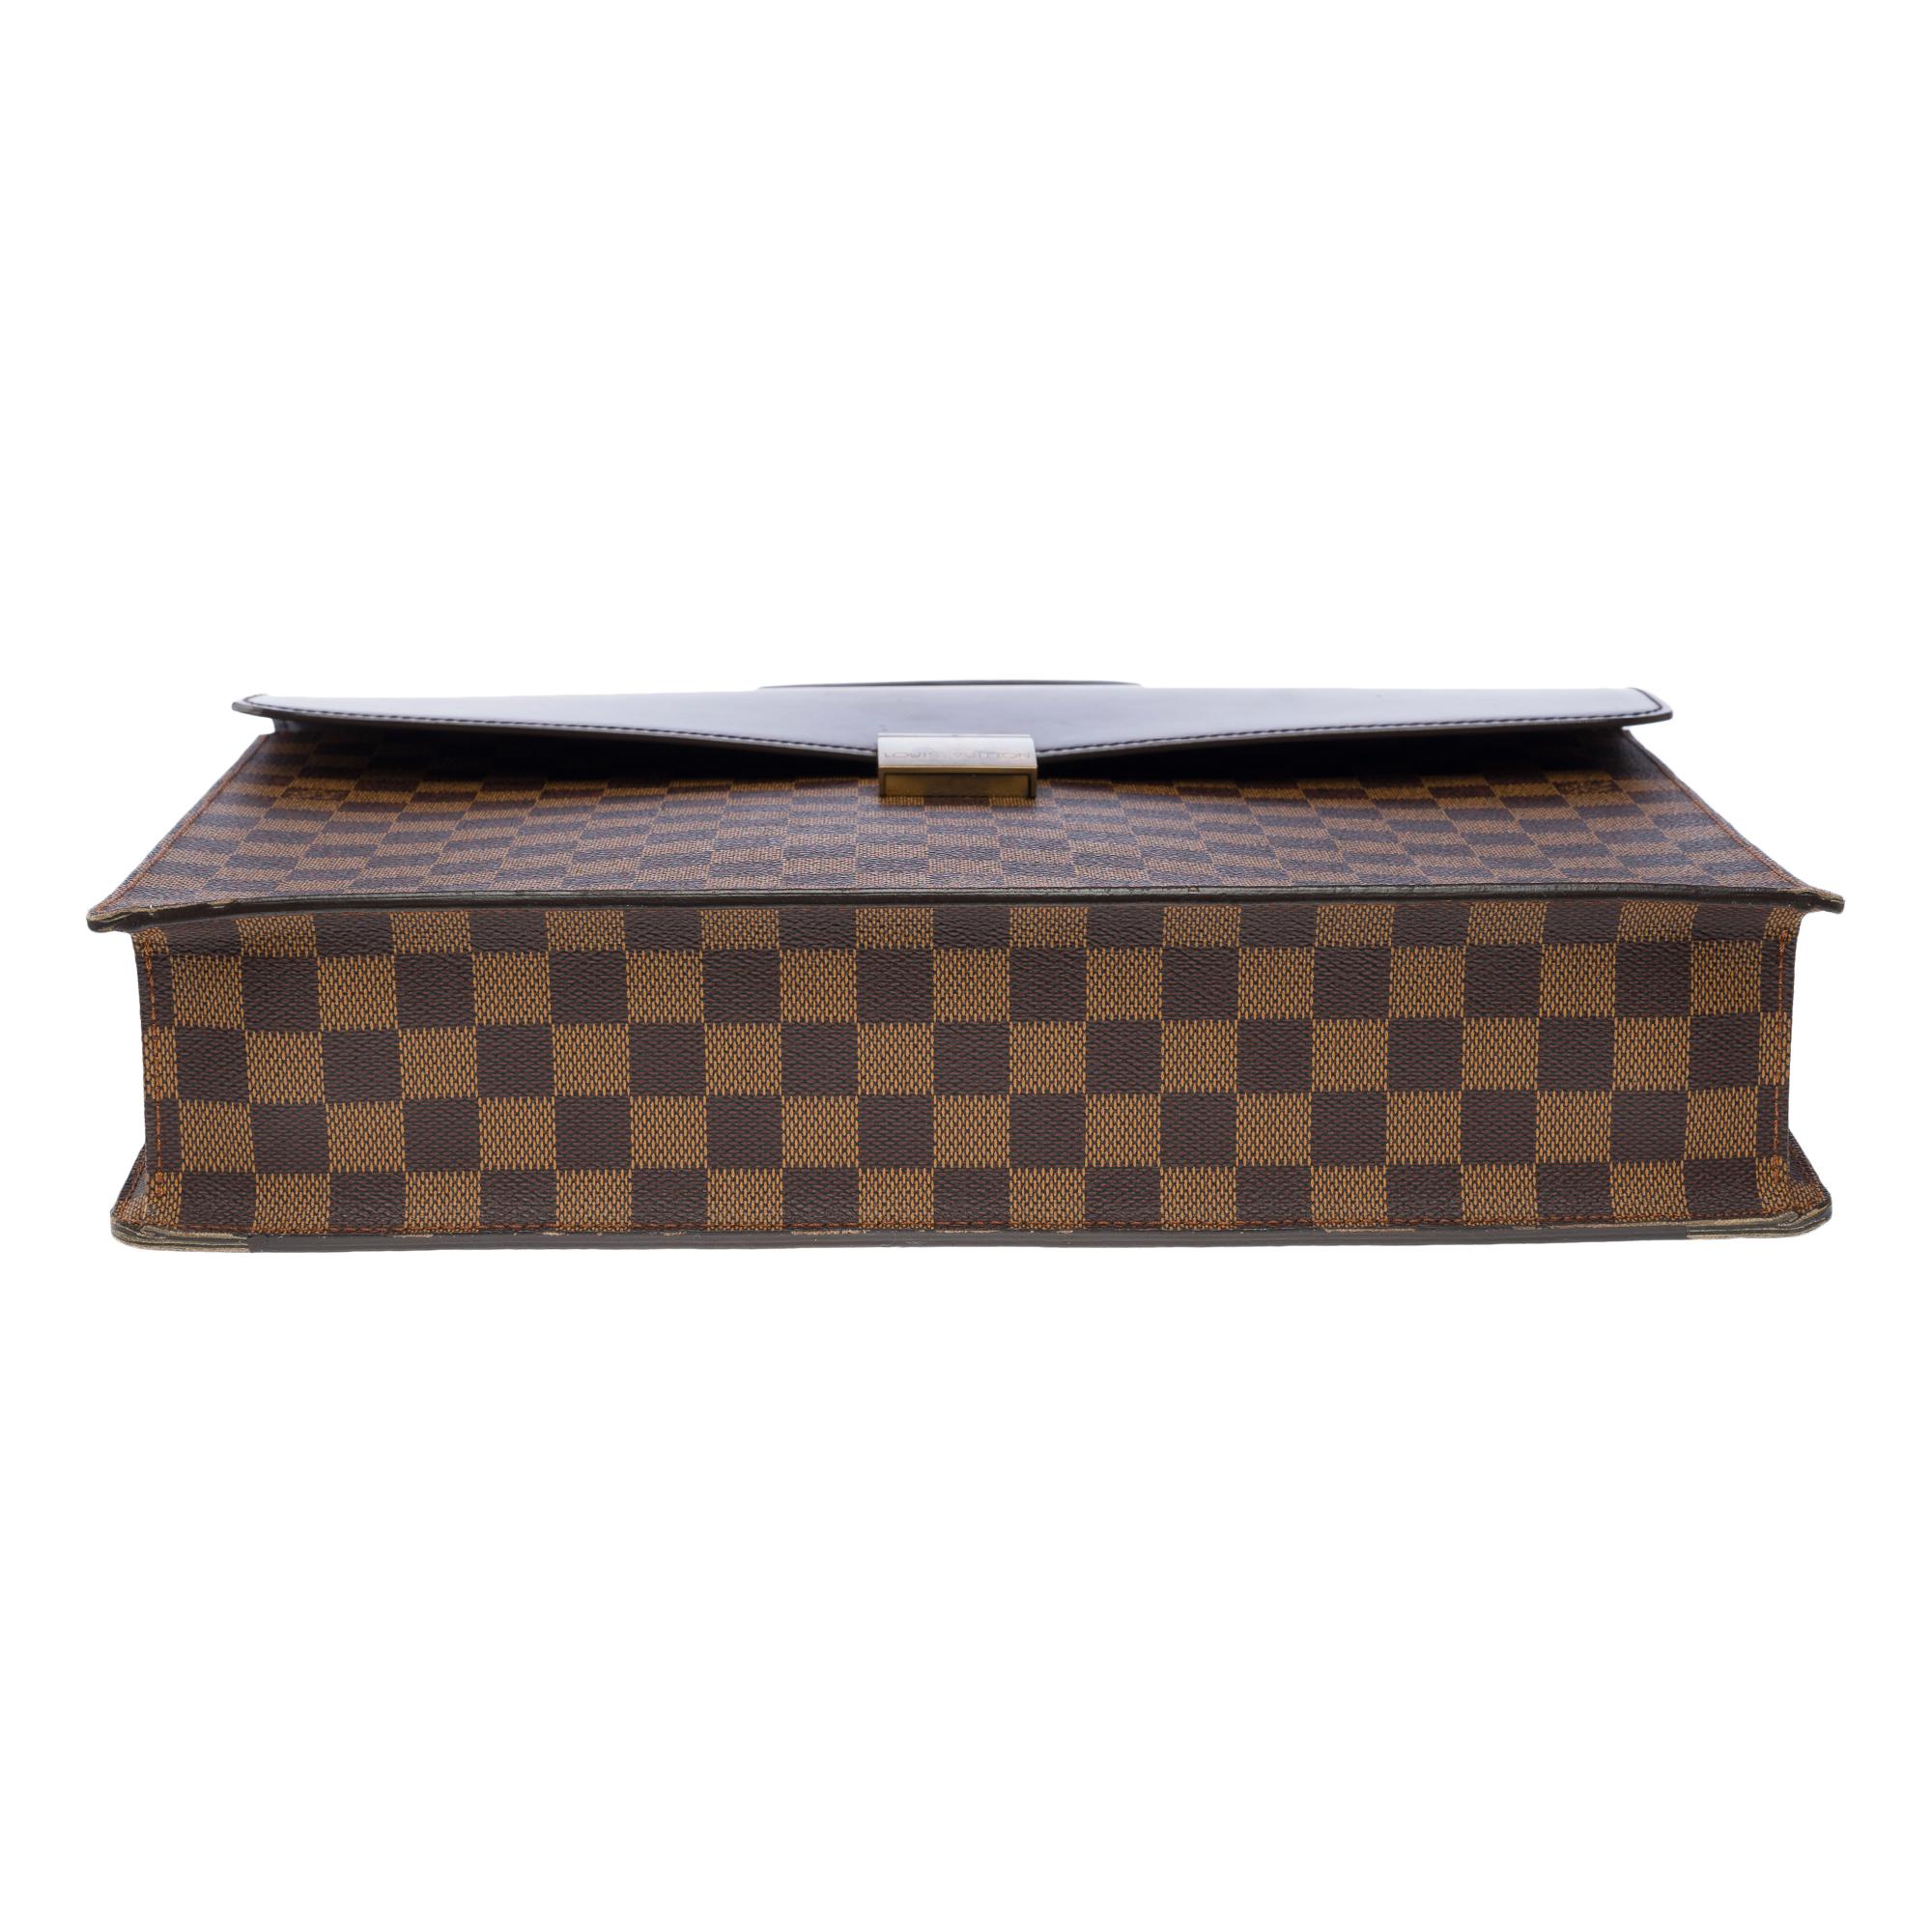 Louis Vuitton Altona PM Briefcase in brown checkerboard canvas and brown leather For Sale 6